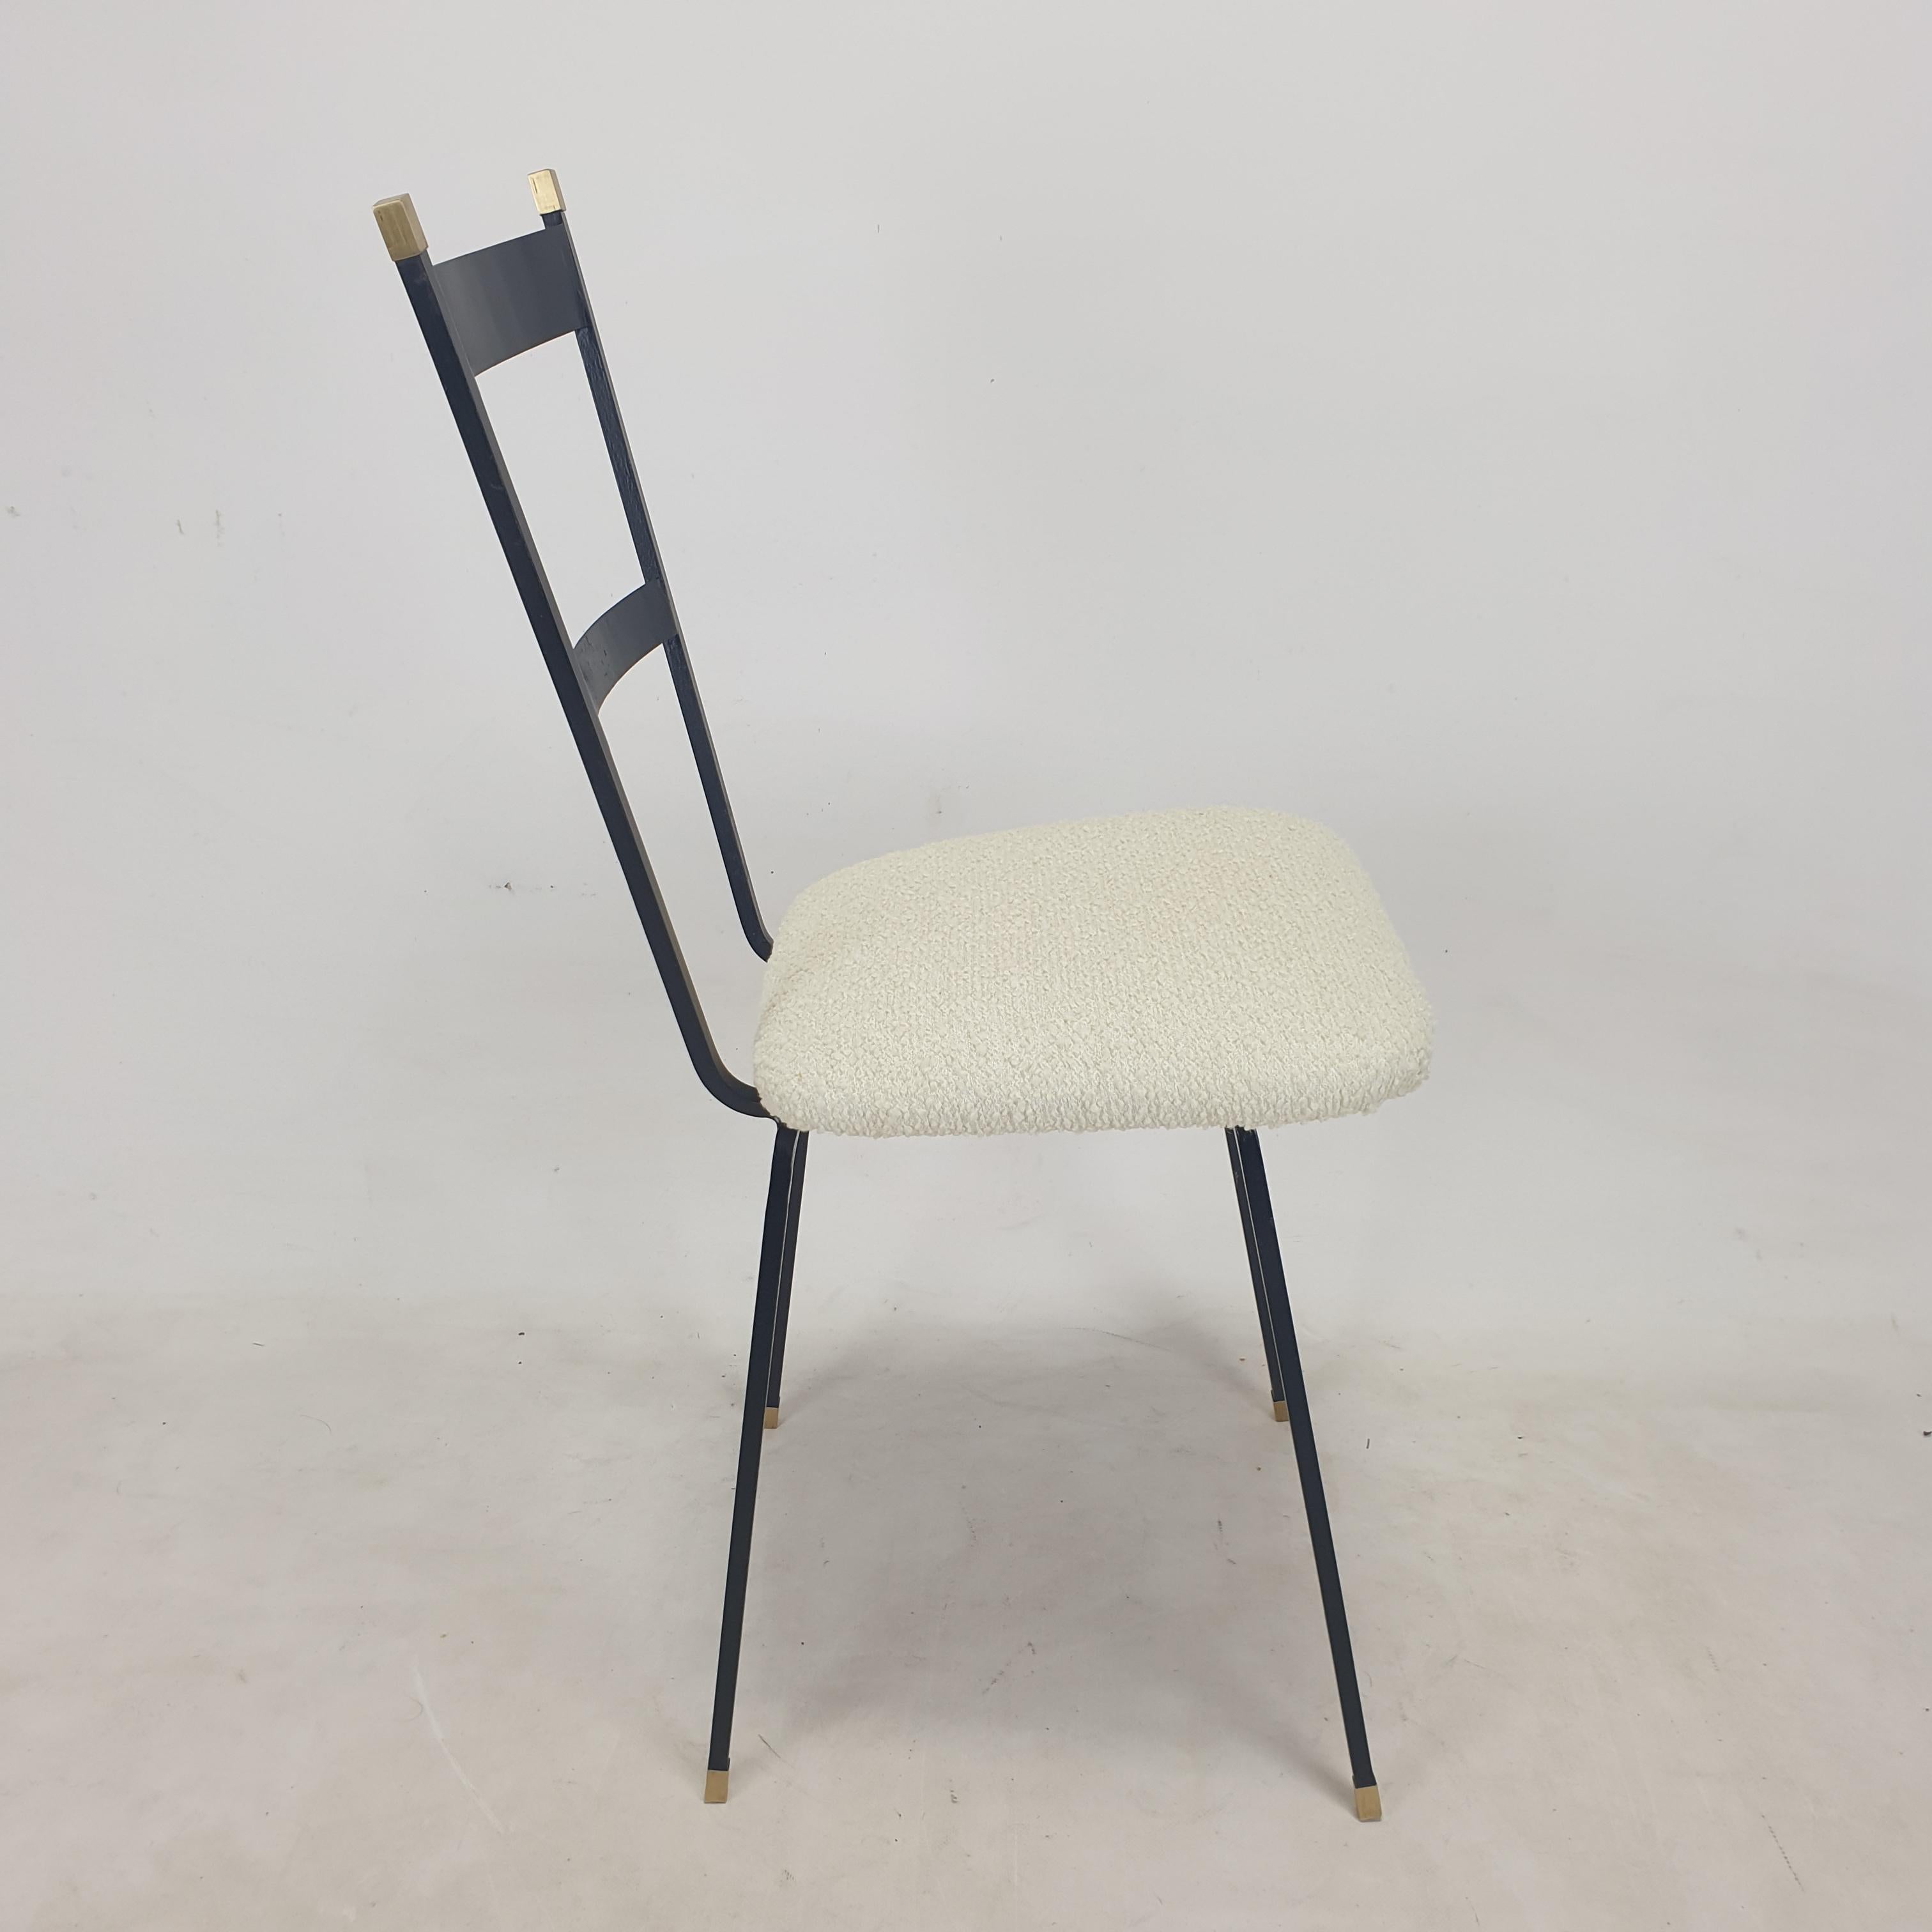 Set of 2 Italian Metal and Brass Chairs, 1960's For Sale 2